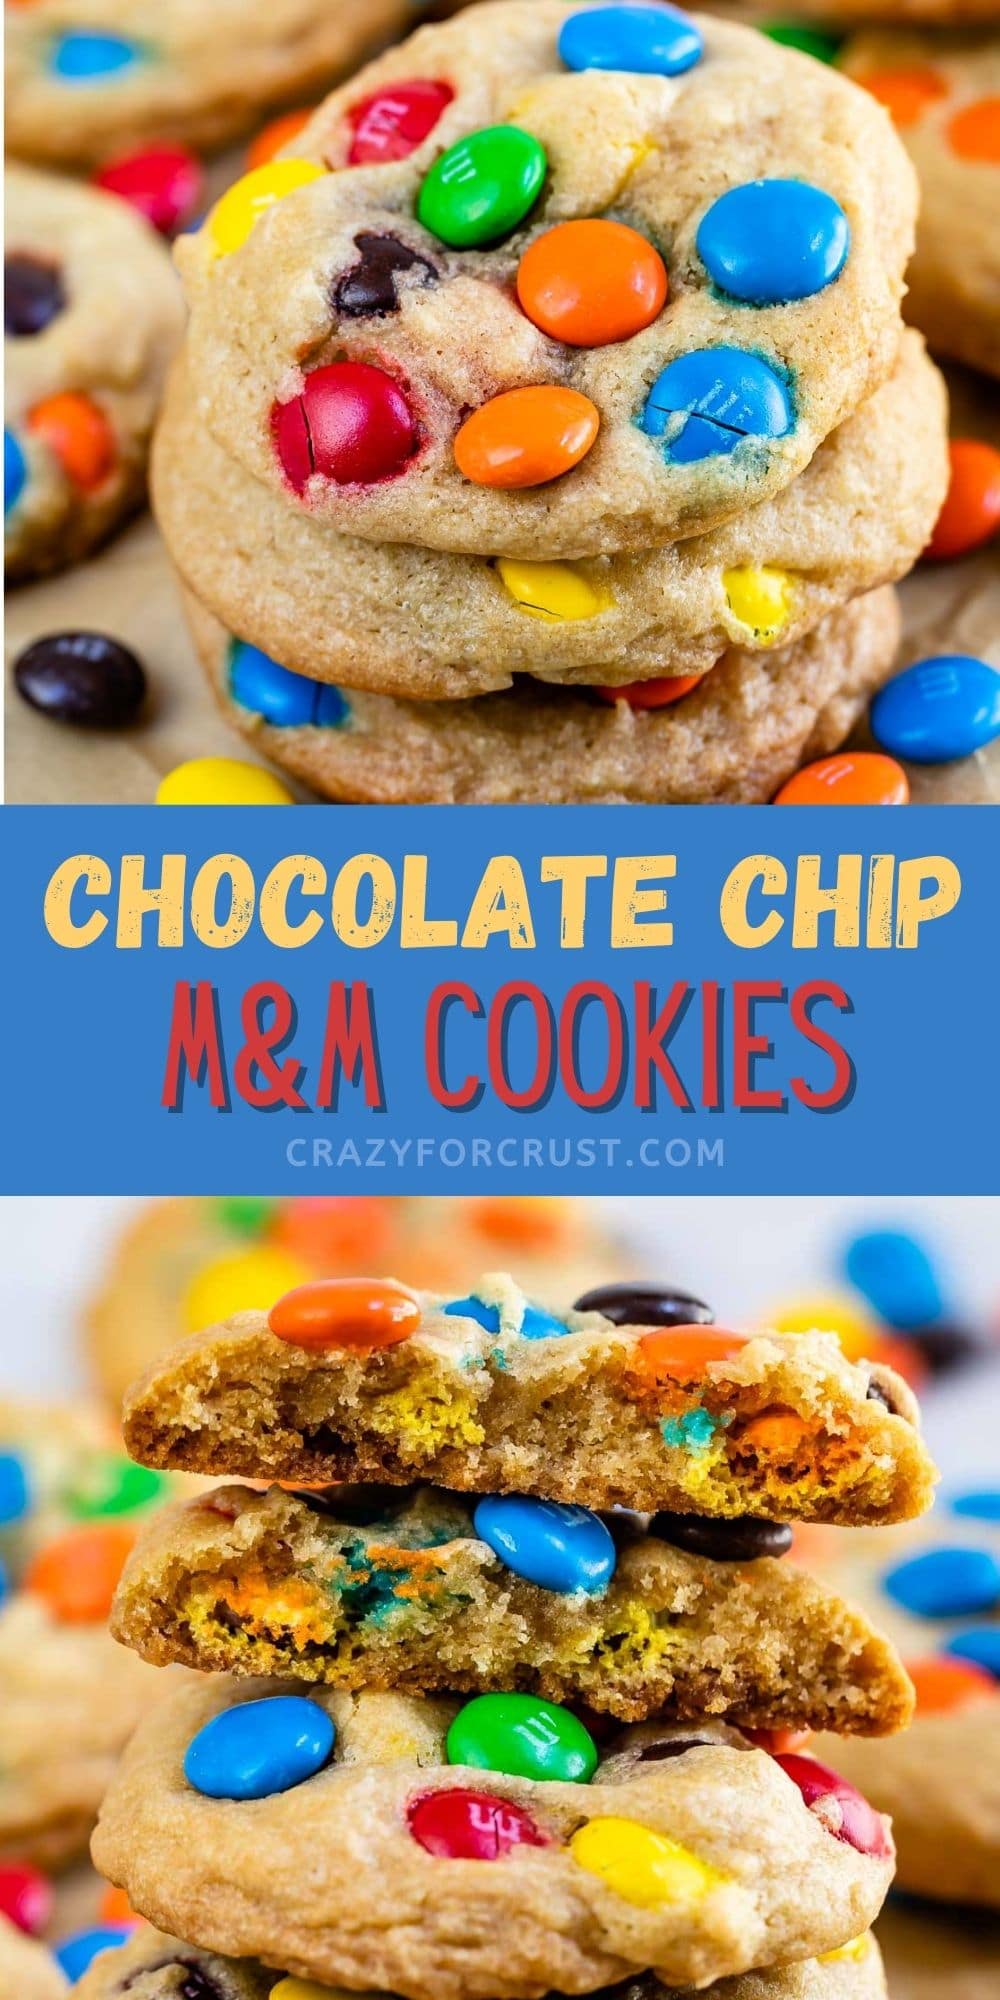 The BEST EVER Chocolate Chip M&M Cookies - Crazy for Crust